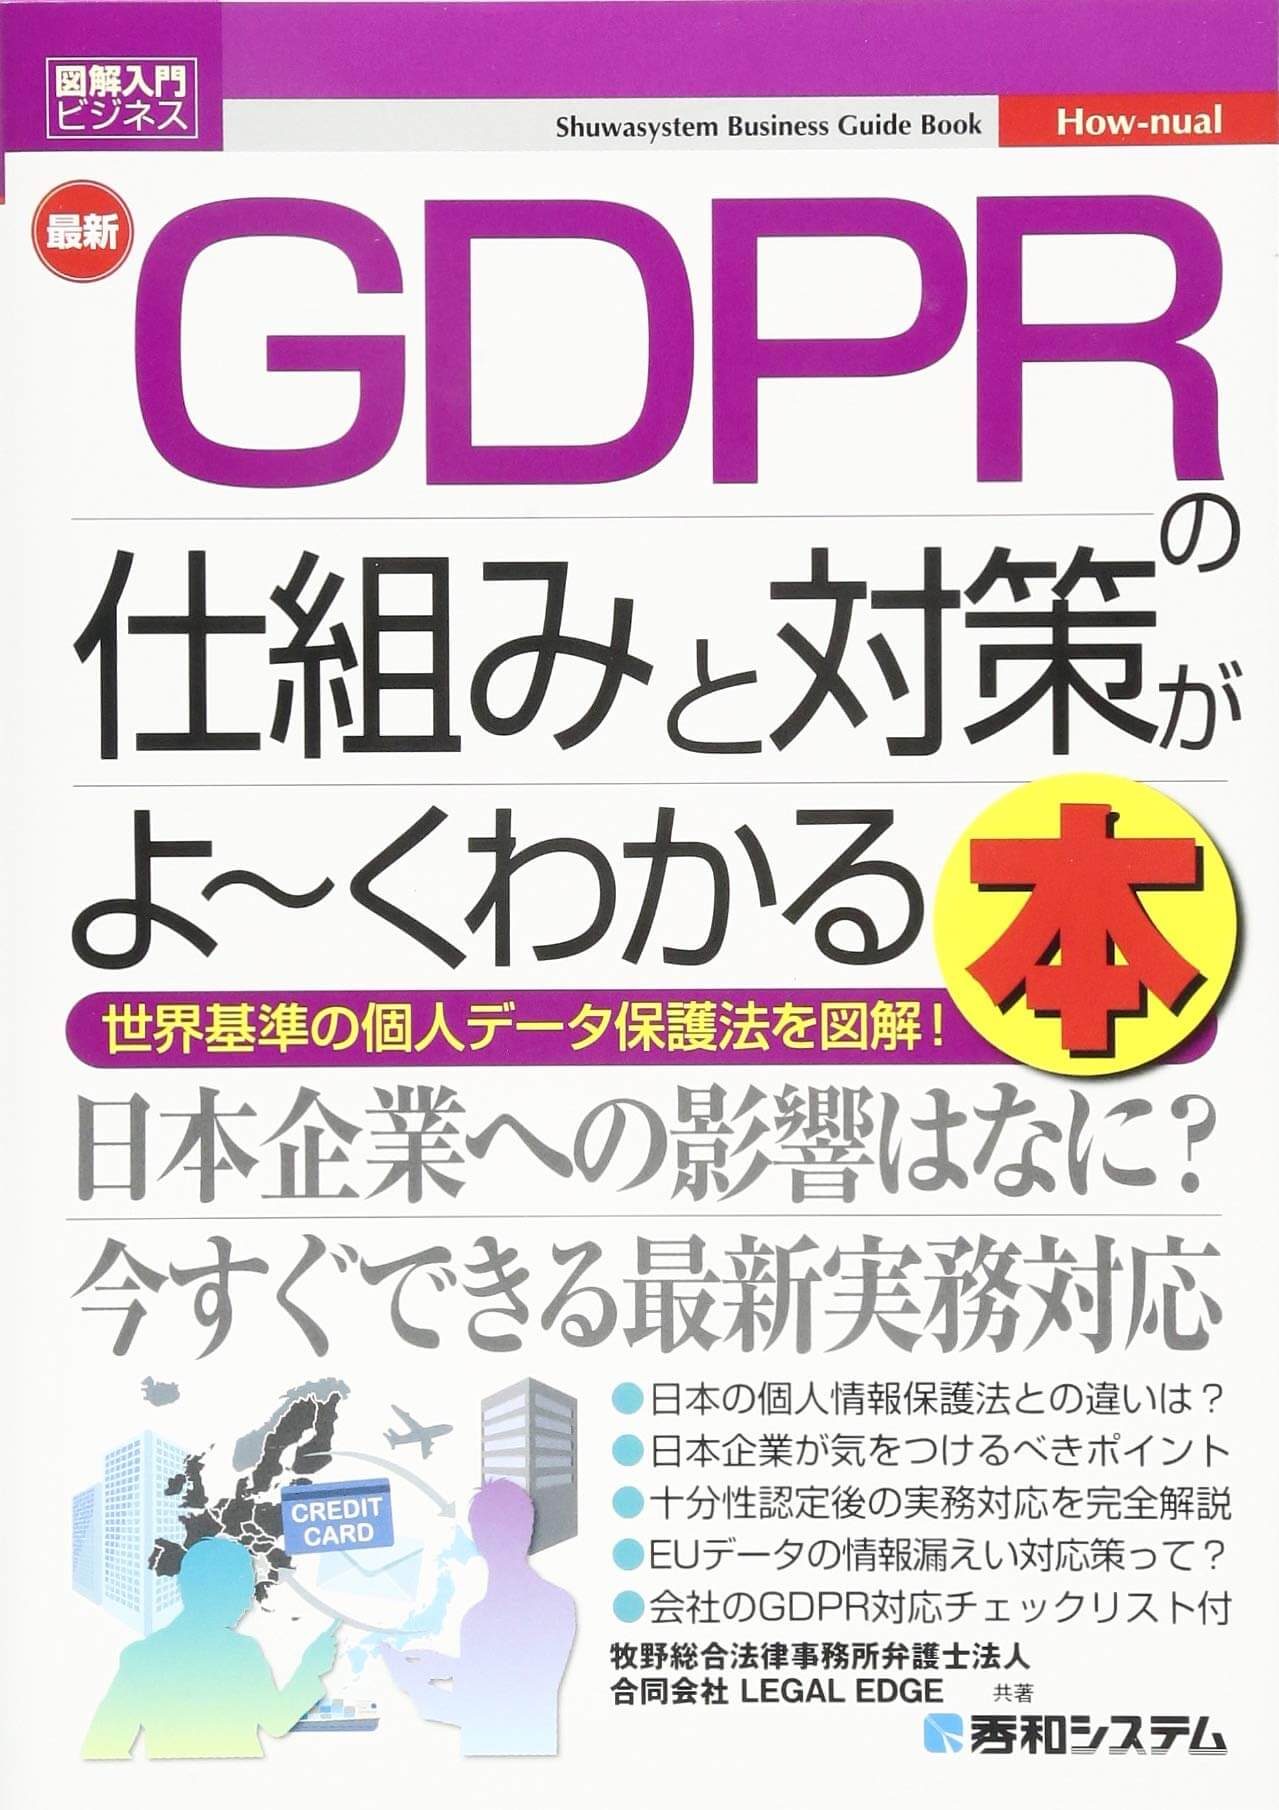 Book Illustrated Introductory Business A book that clearly understands the mechanism and countermeasures of the latest GDPR (Makino Sogo Law Office Legal Corporation (Author), LEGAL EDGE LLC (Author) / Shuwa System)” cover image